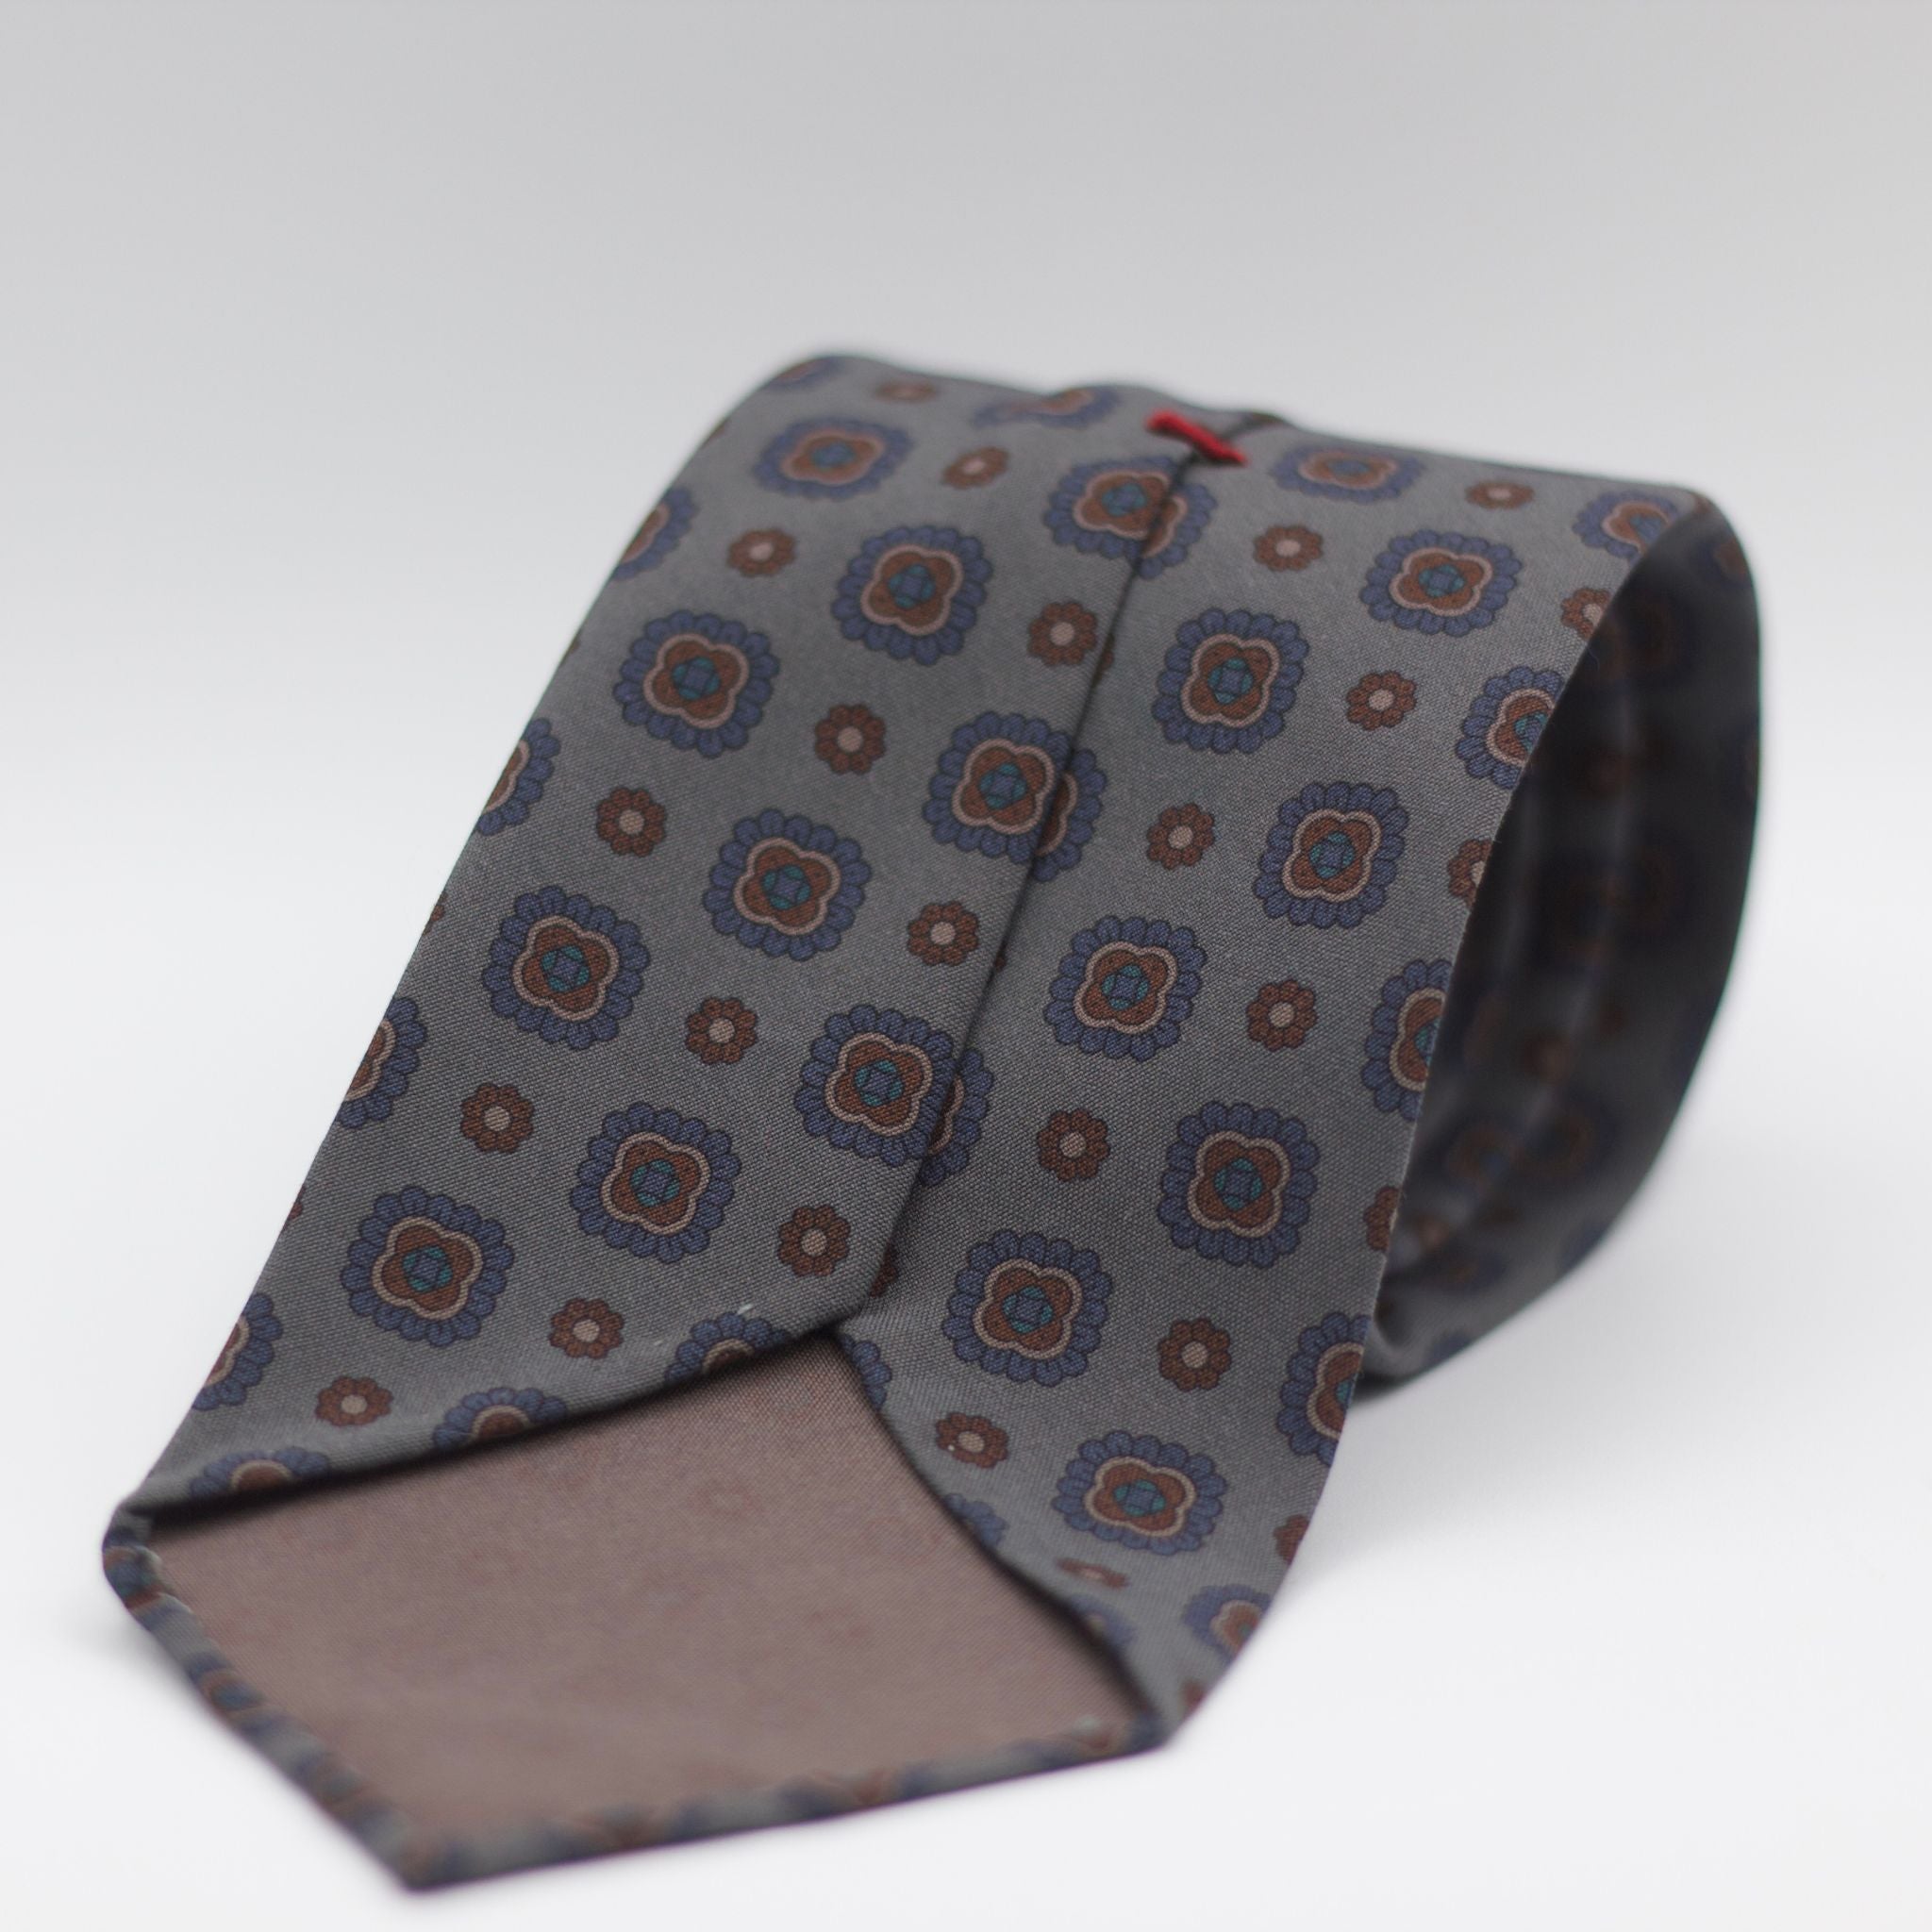 Cruciani & Bella 100% Printed Madder Silk  Italian fabric Unlined tie Grey, Blue and Brown Motif Unlined Tie Handmade in Italy 8 cm x 150 cm